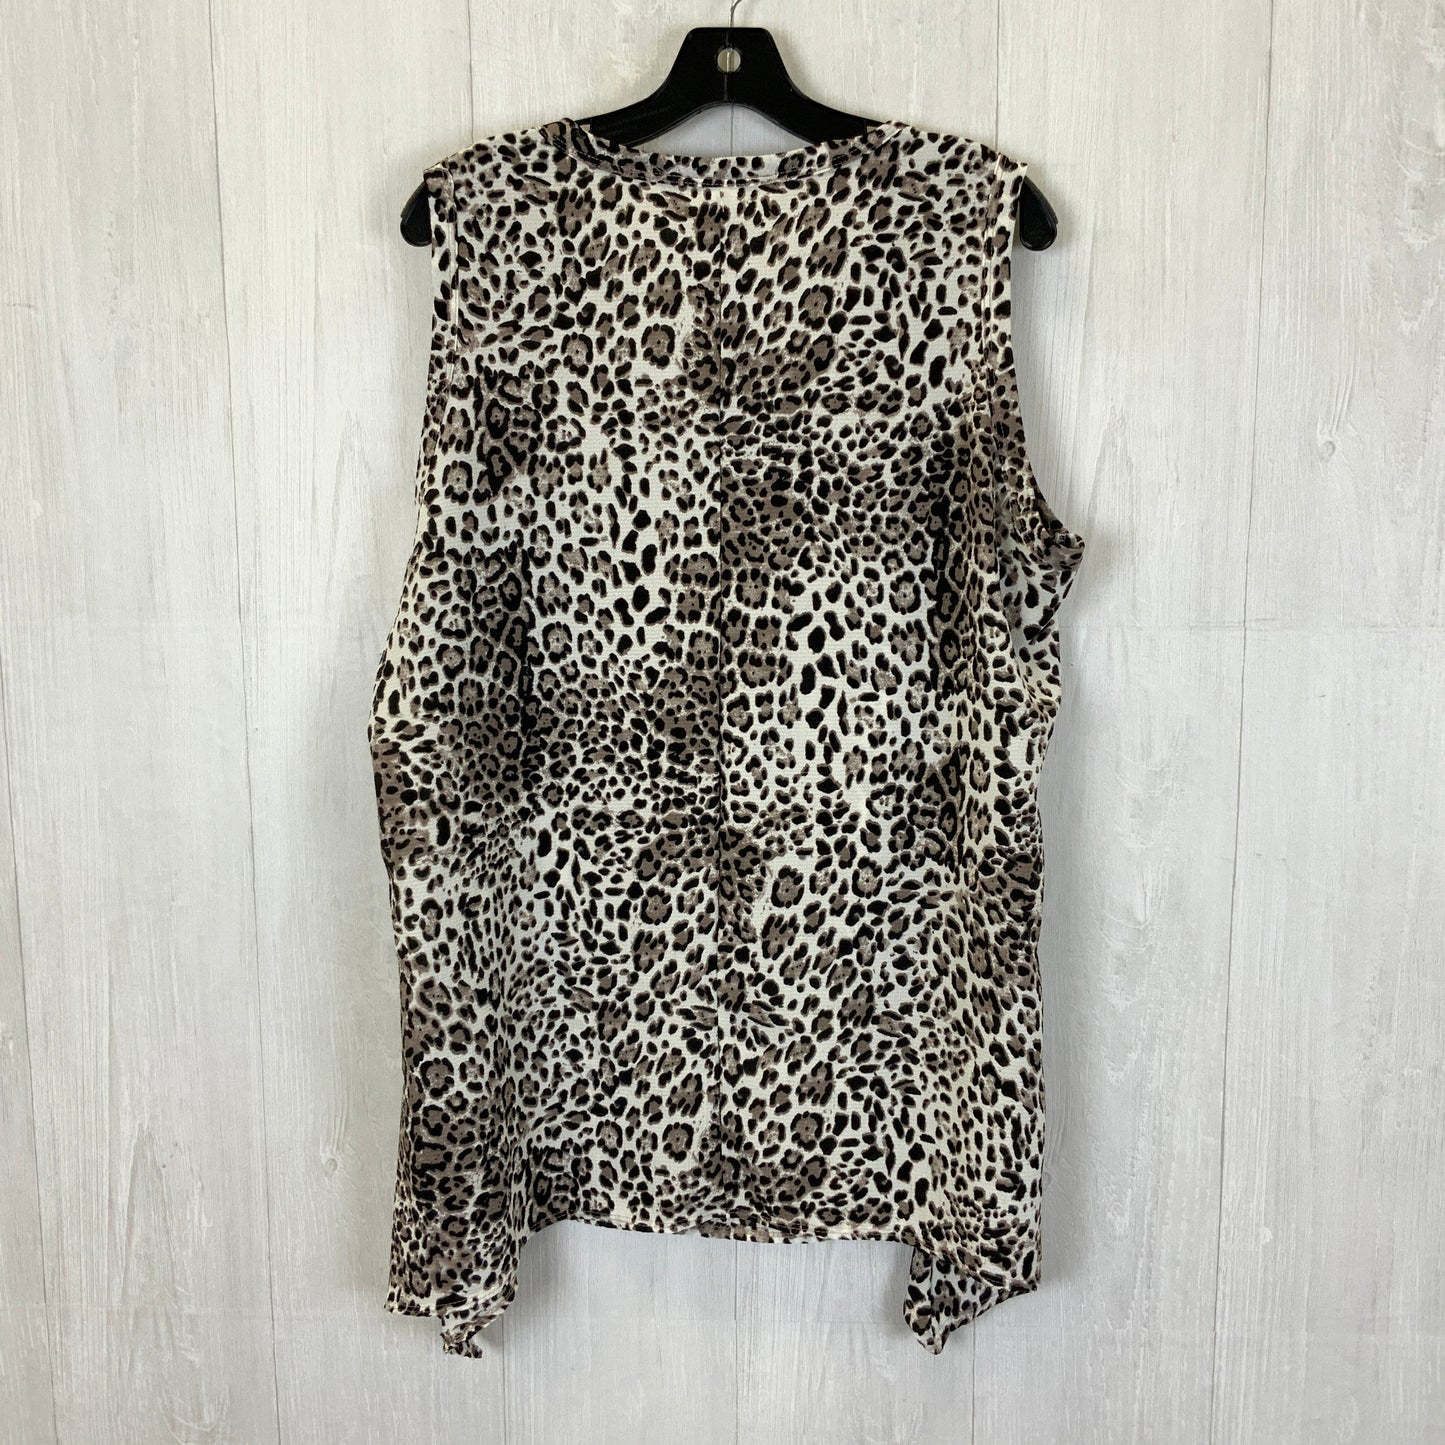 Leopard Print Top Sleeveless Clothes Mentor, Size 3x